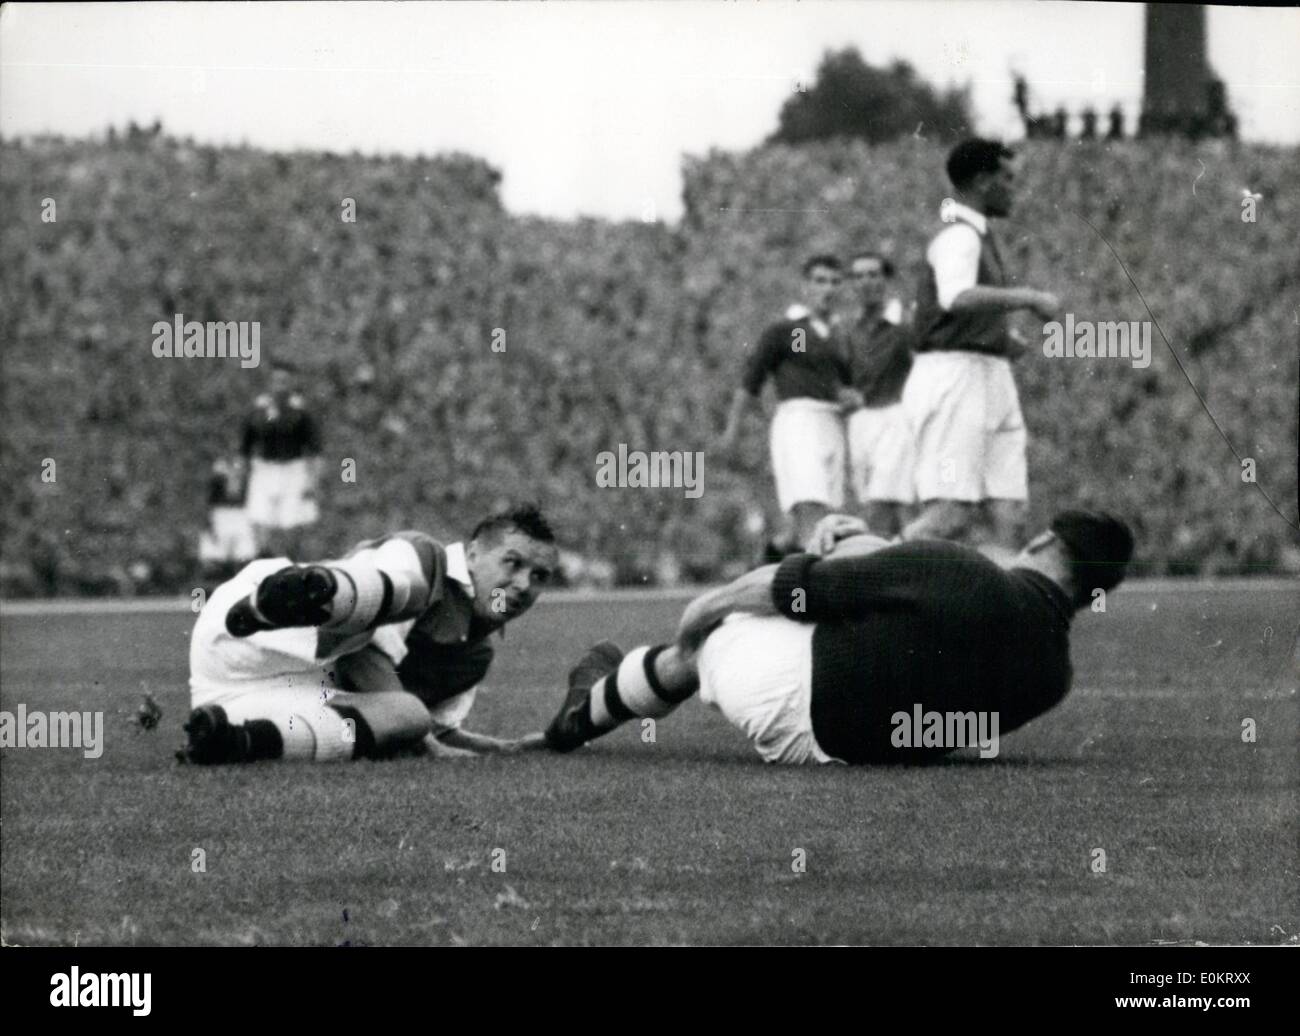 Aug. 08, 1949 - Arsenal V Chelsea at Highbury : photo shows Swindon, the arsenal goalkeeper, and Laurie Scott, the arsenal right - back, collided whilst defending their goal. this evening. Stock Photo